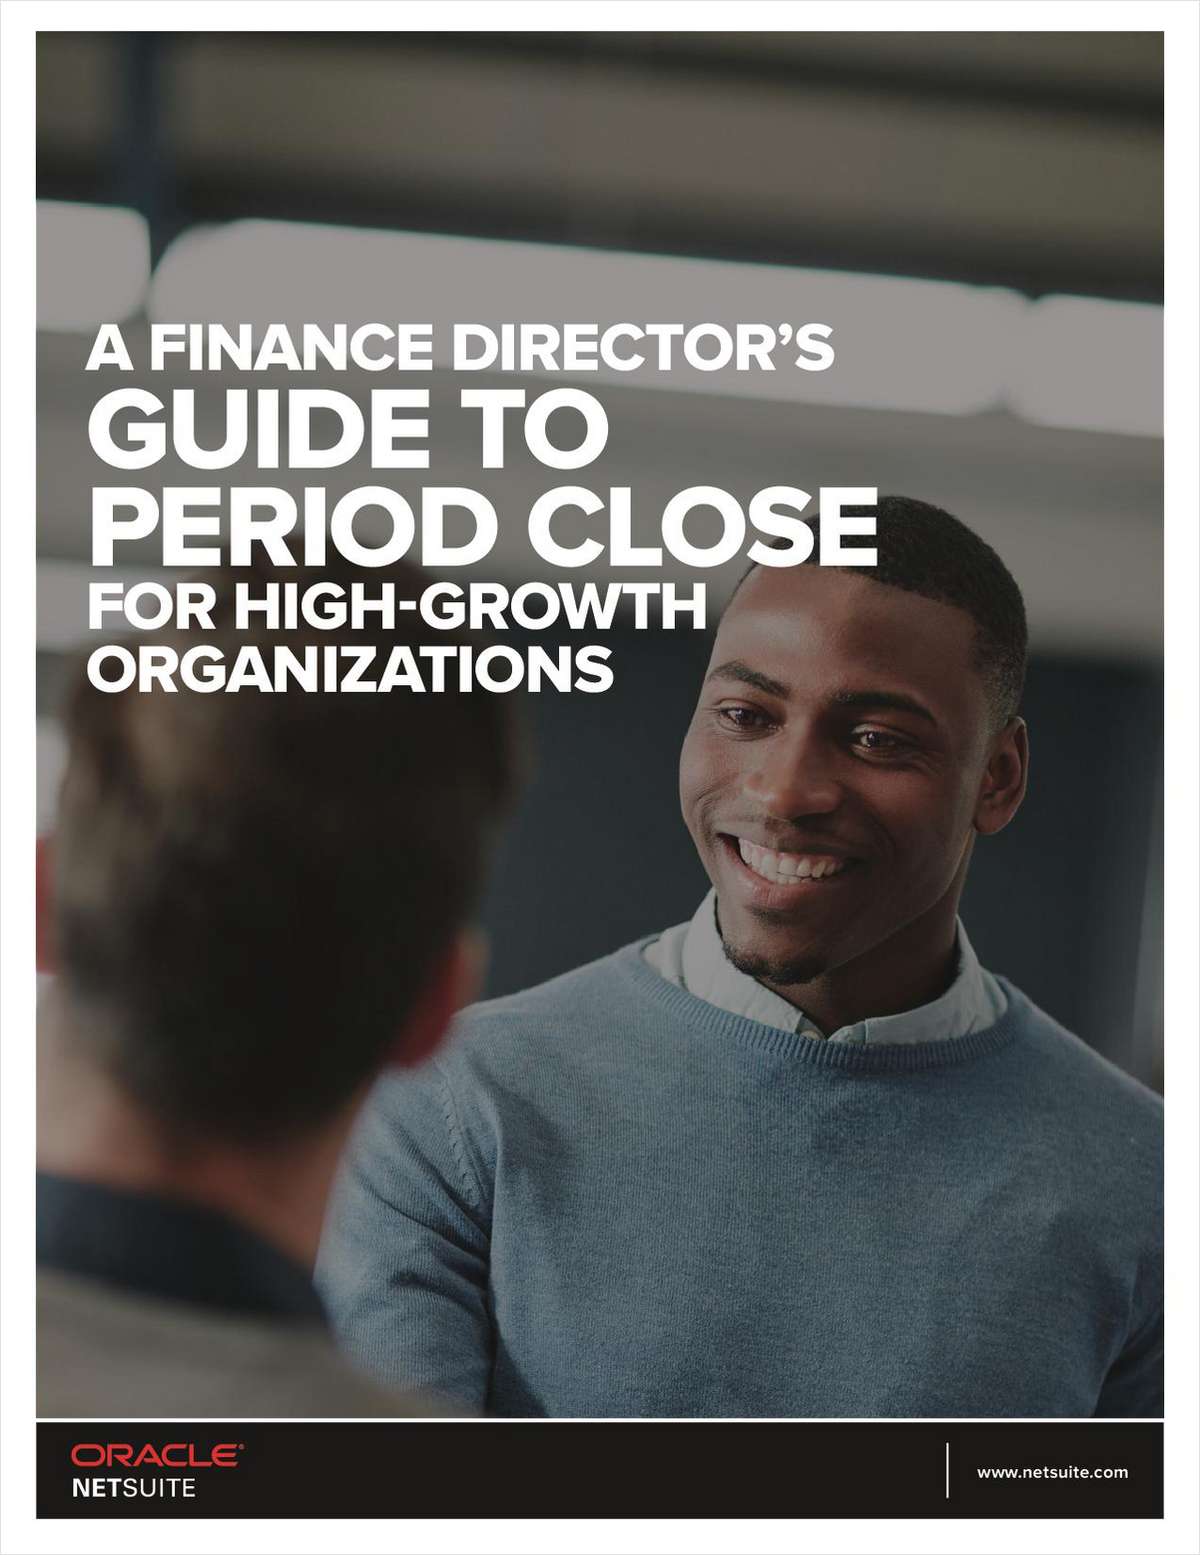 A Finance Director's Guide to Period Close for High Growth Organizations